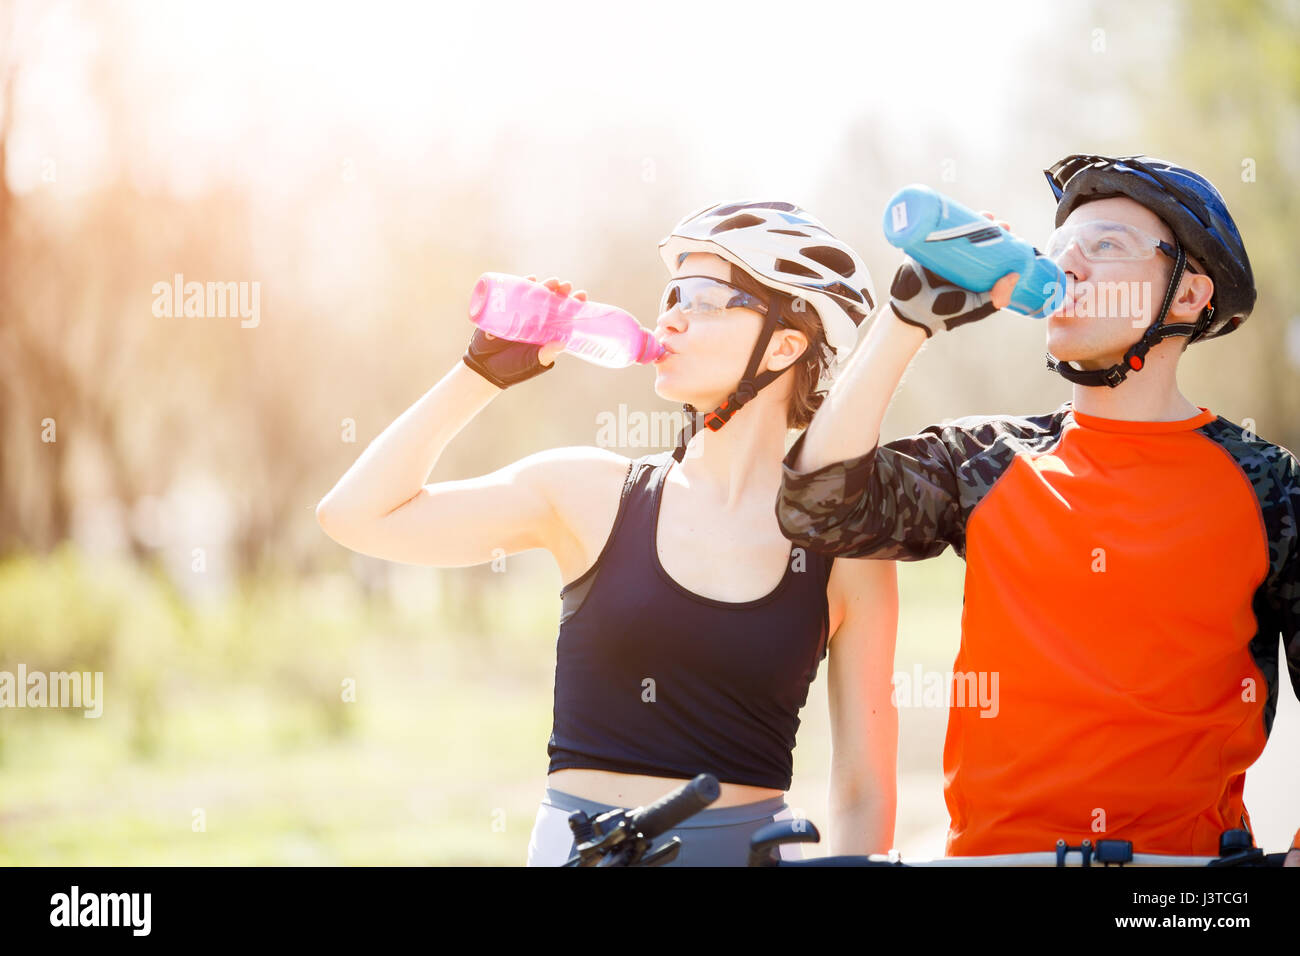 Cyclists drink water from bottle Stock Photo